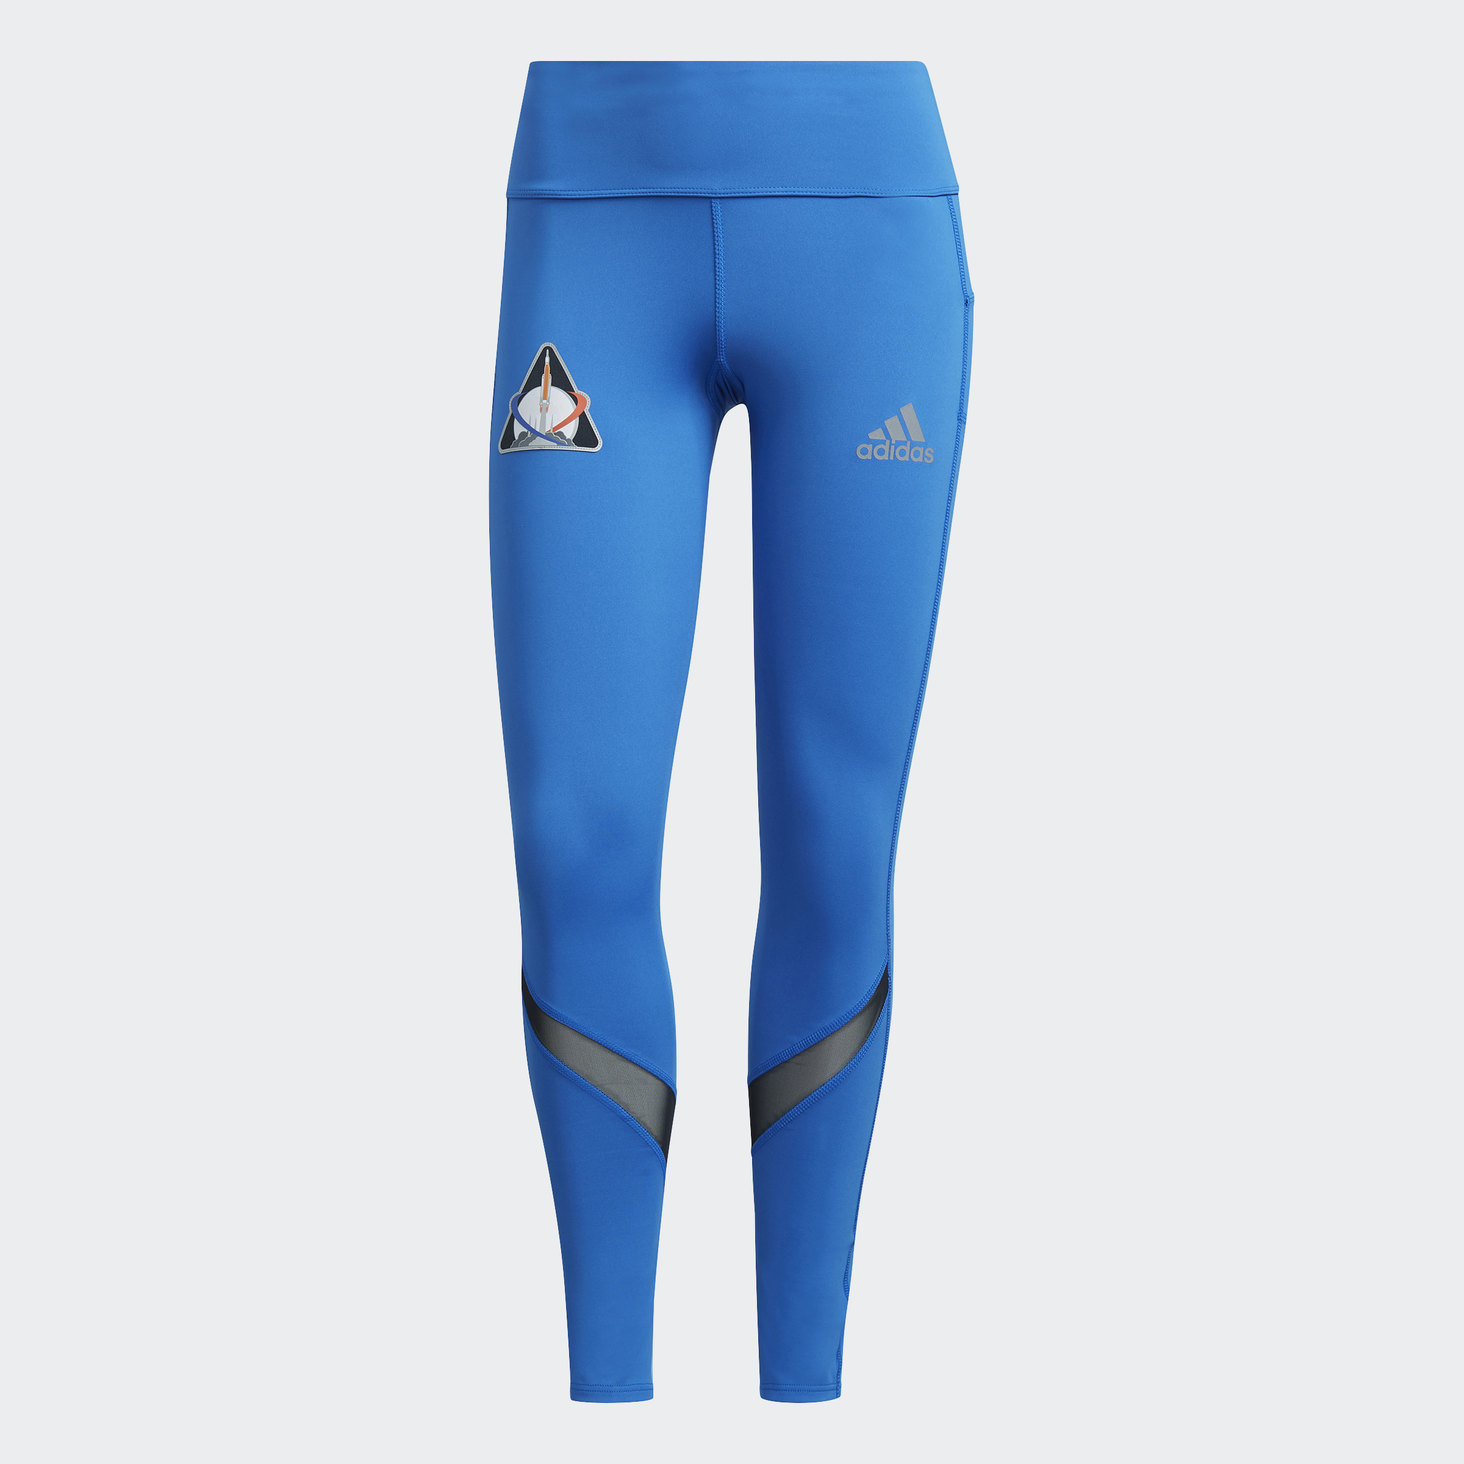 Society Size Agriculture Precision 1099 of International | Adidas Leggings